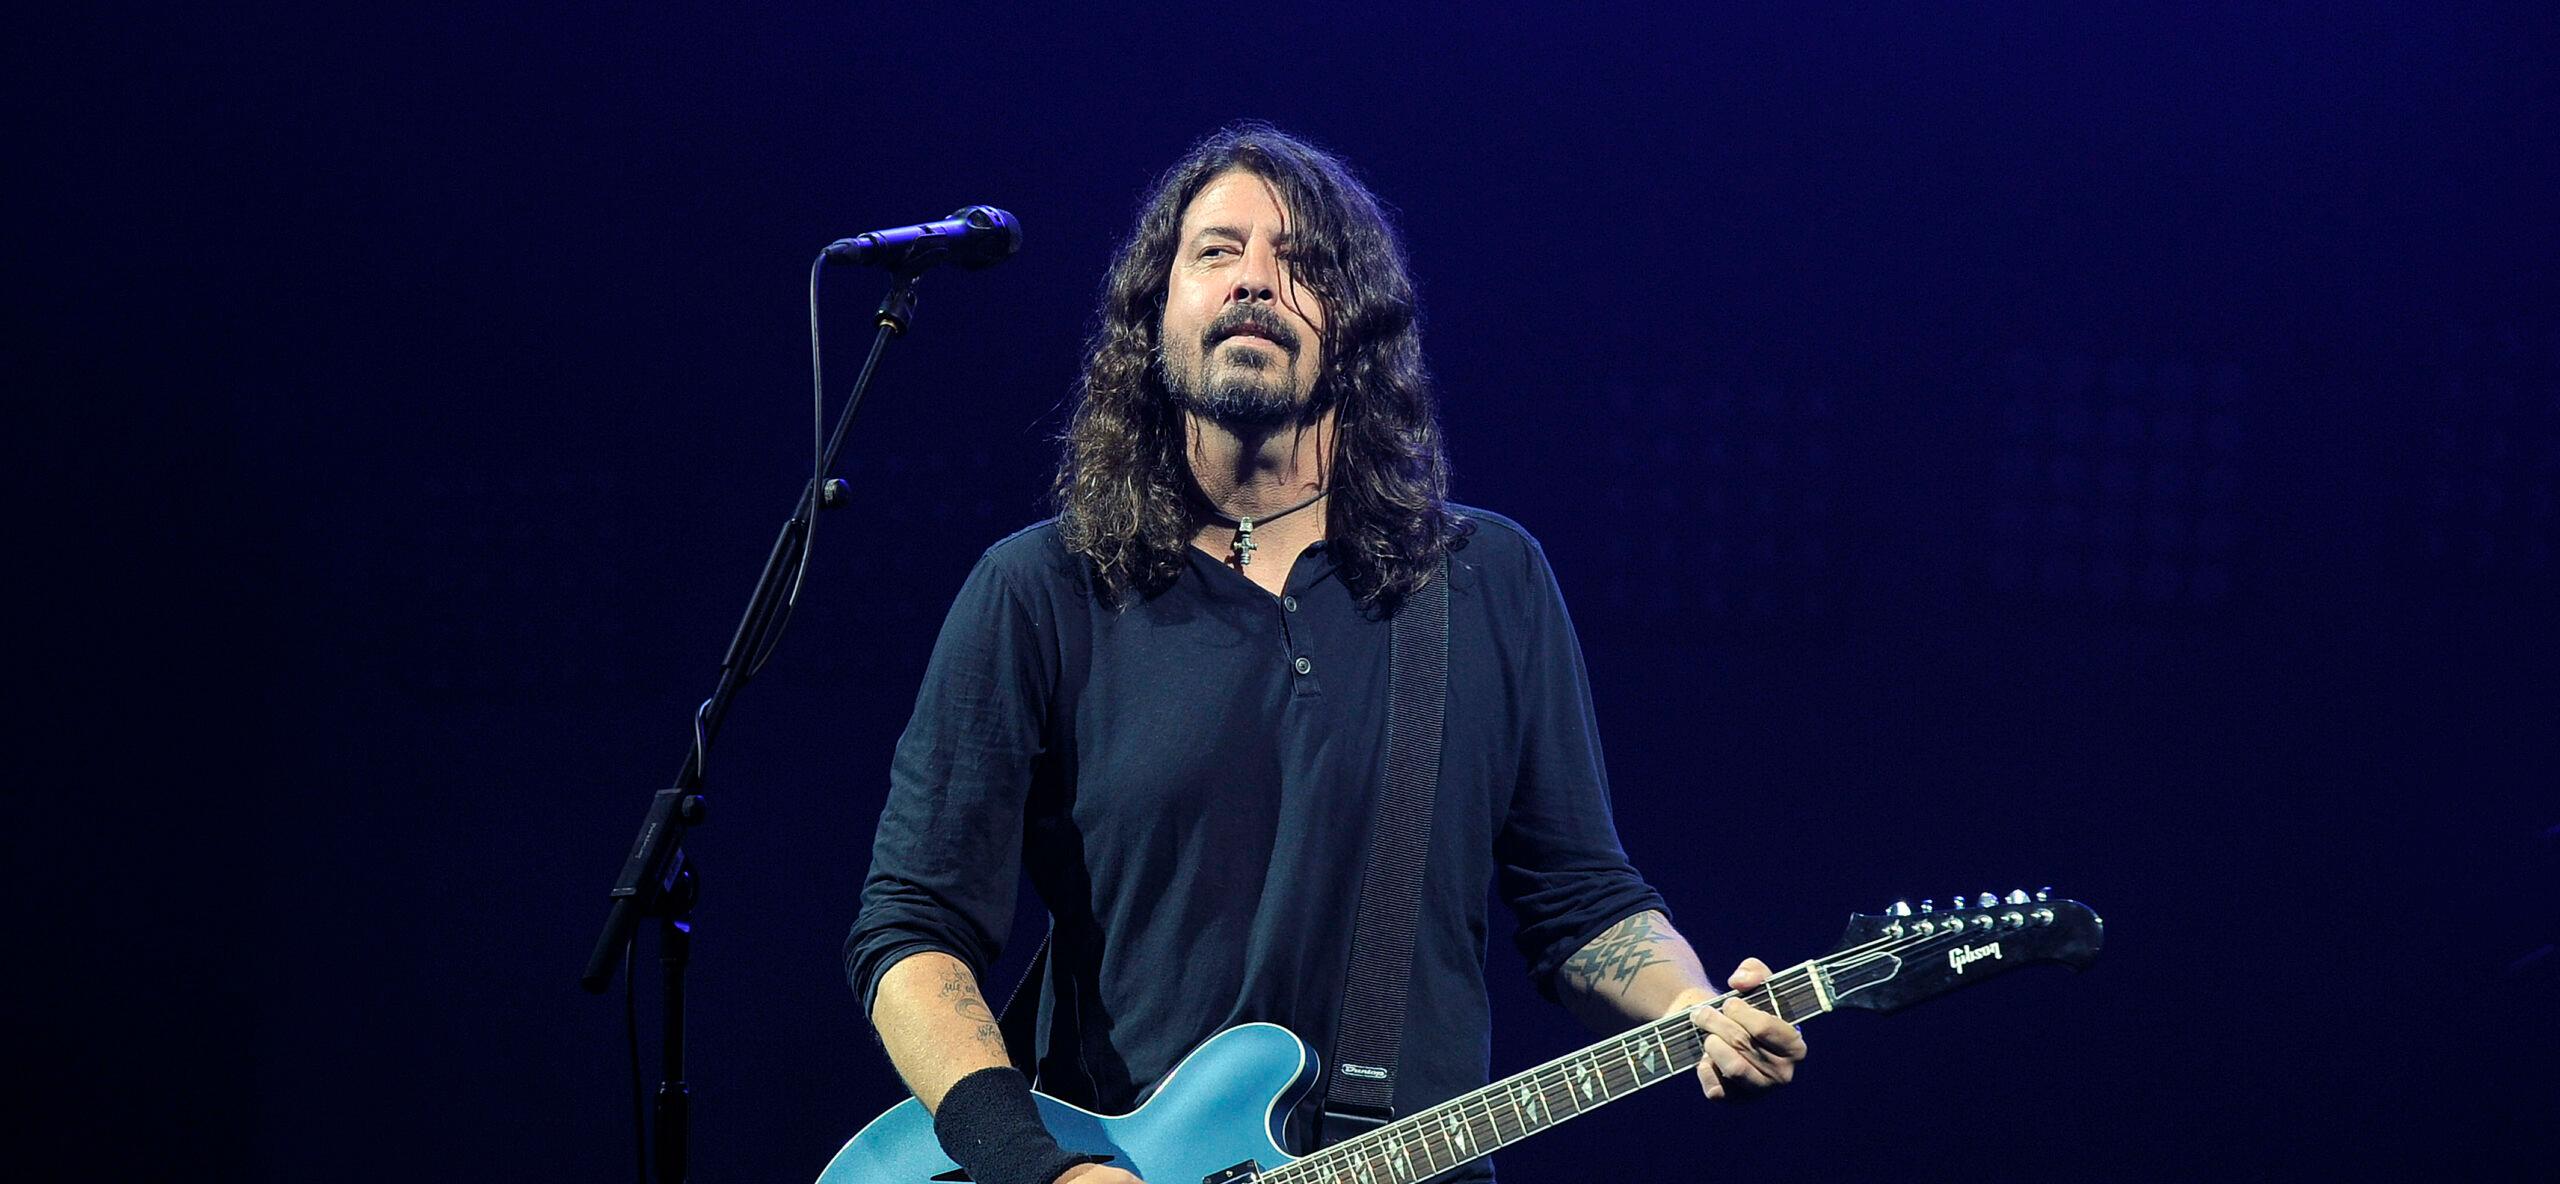 Twitter Users Celebrate Dave Grohl’s Birthday By Sharing Favorite Performances!